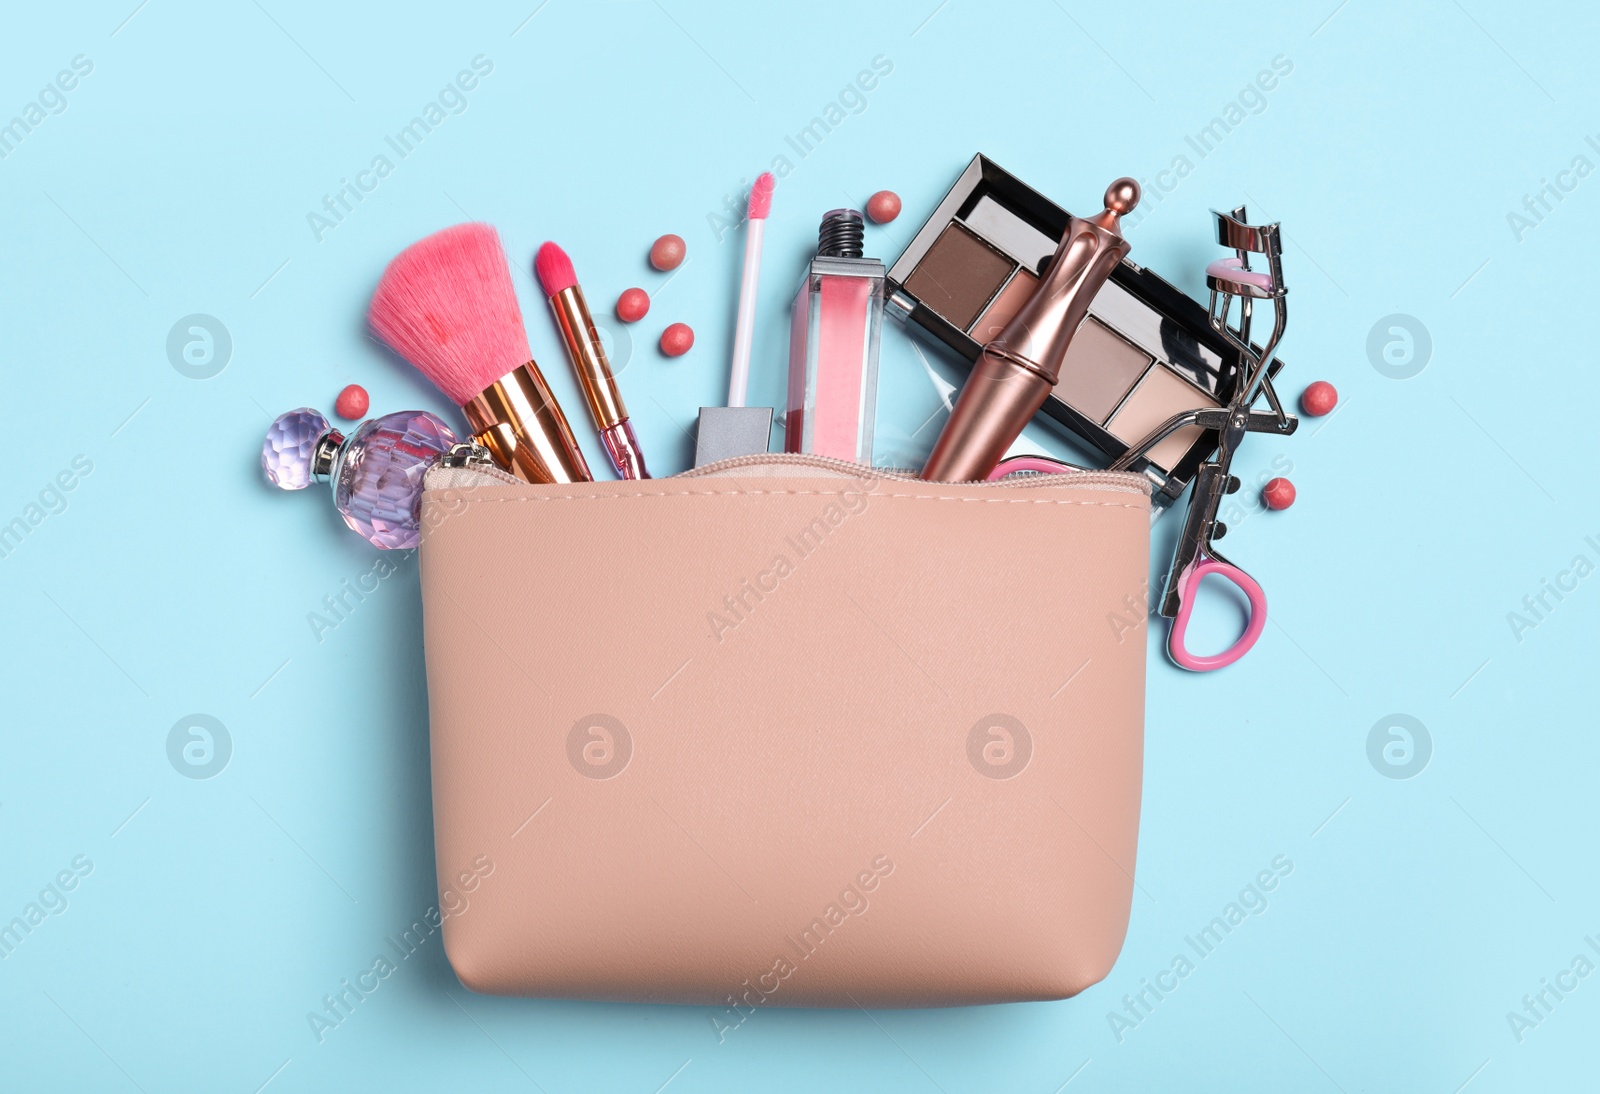 Photo of Cosmetic bag and makeup products with accessories on light blue background, flat lay